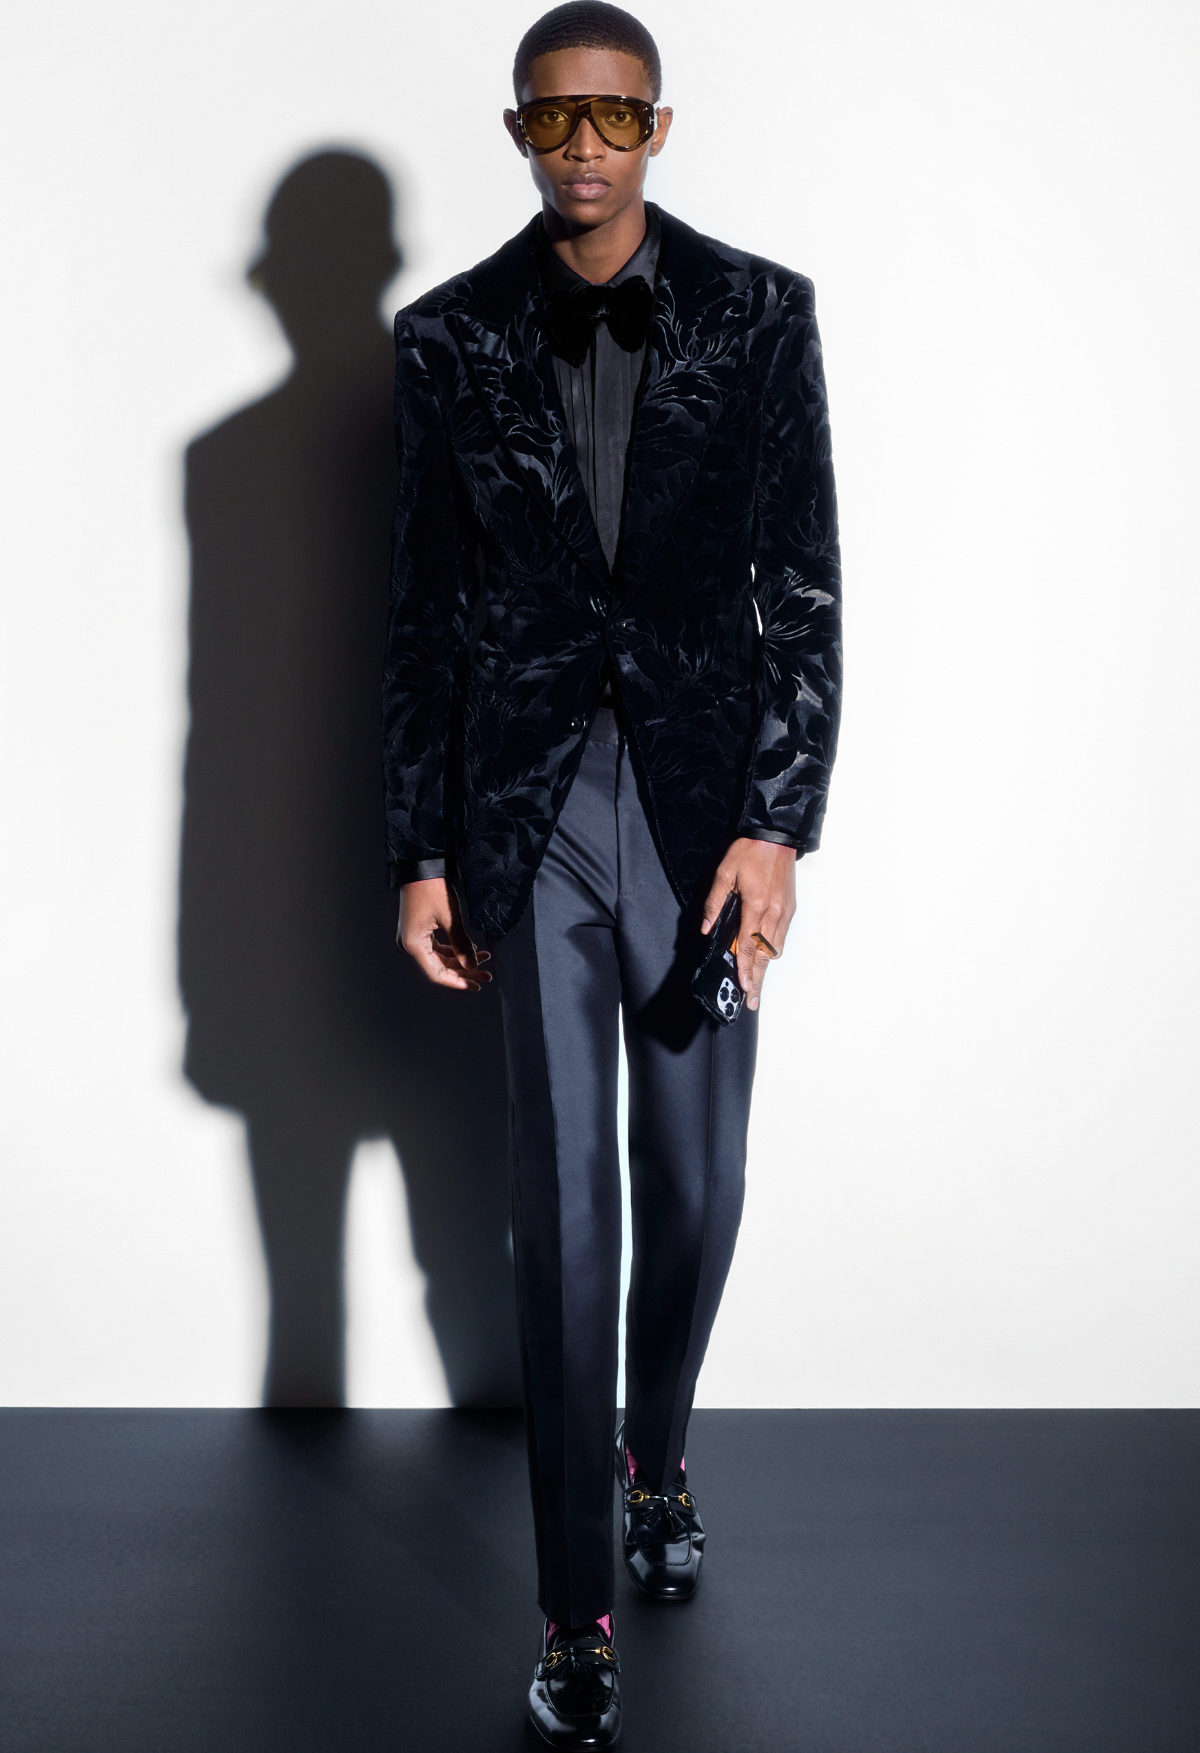 Tom Ford Presents His New Autumn/Winter 2022 Menswear Collection